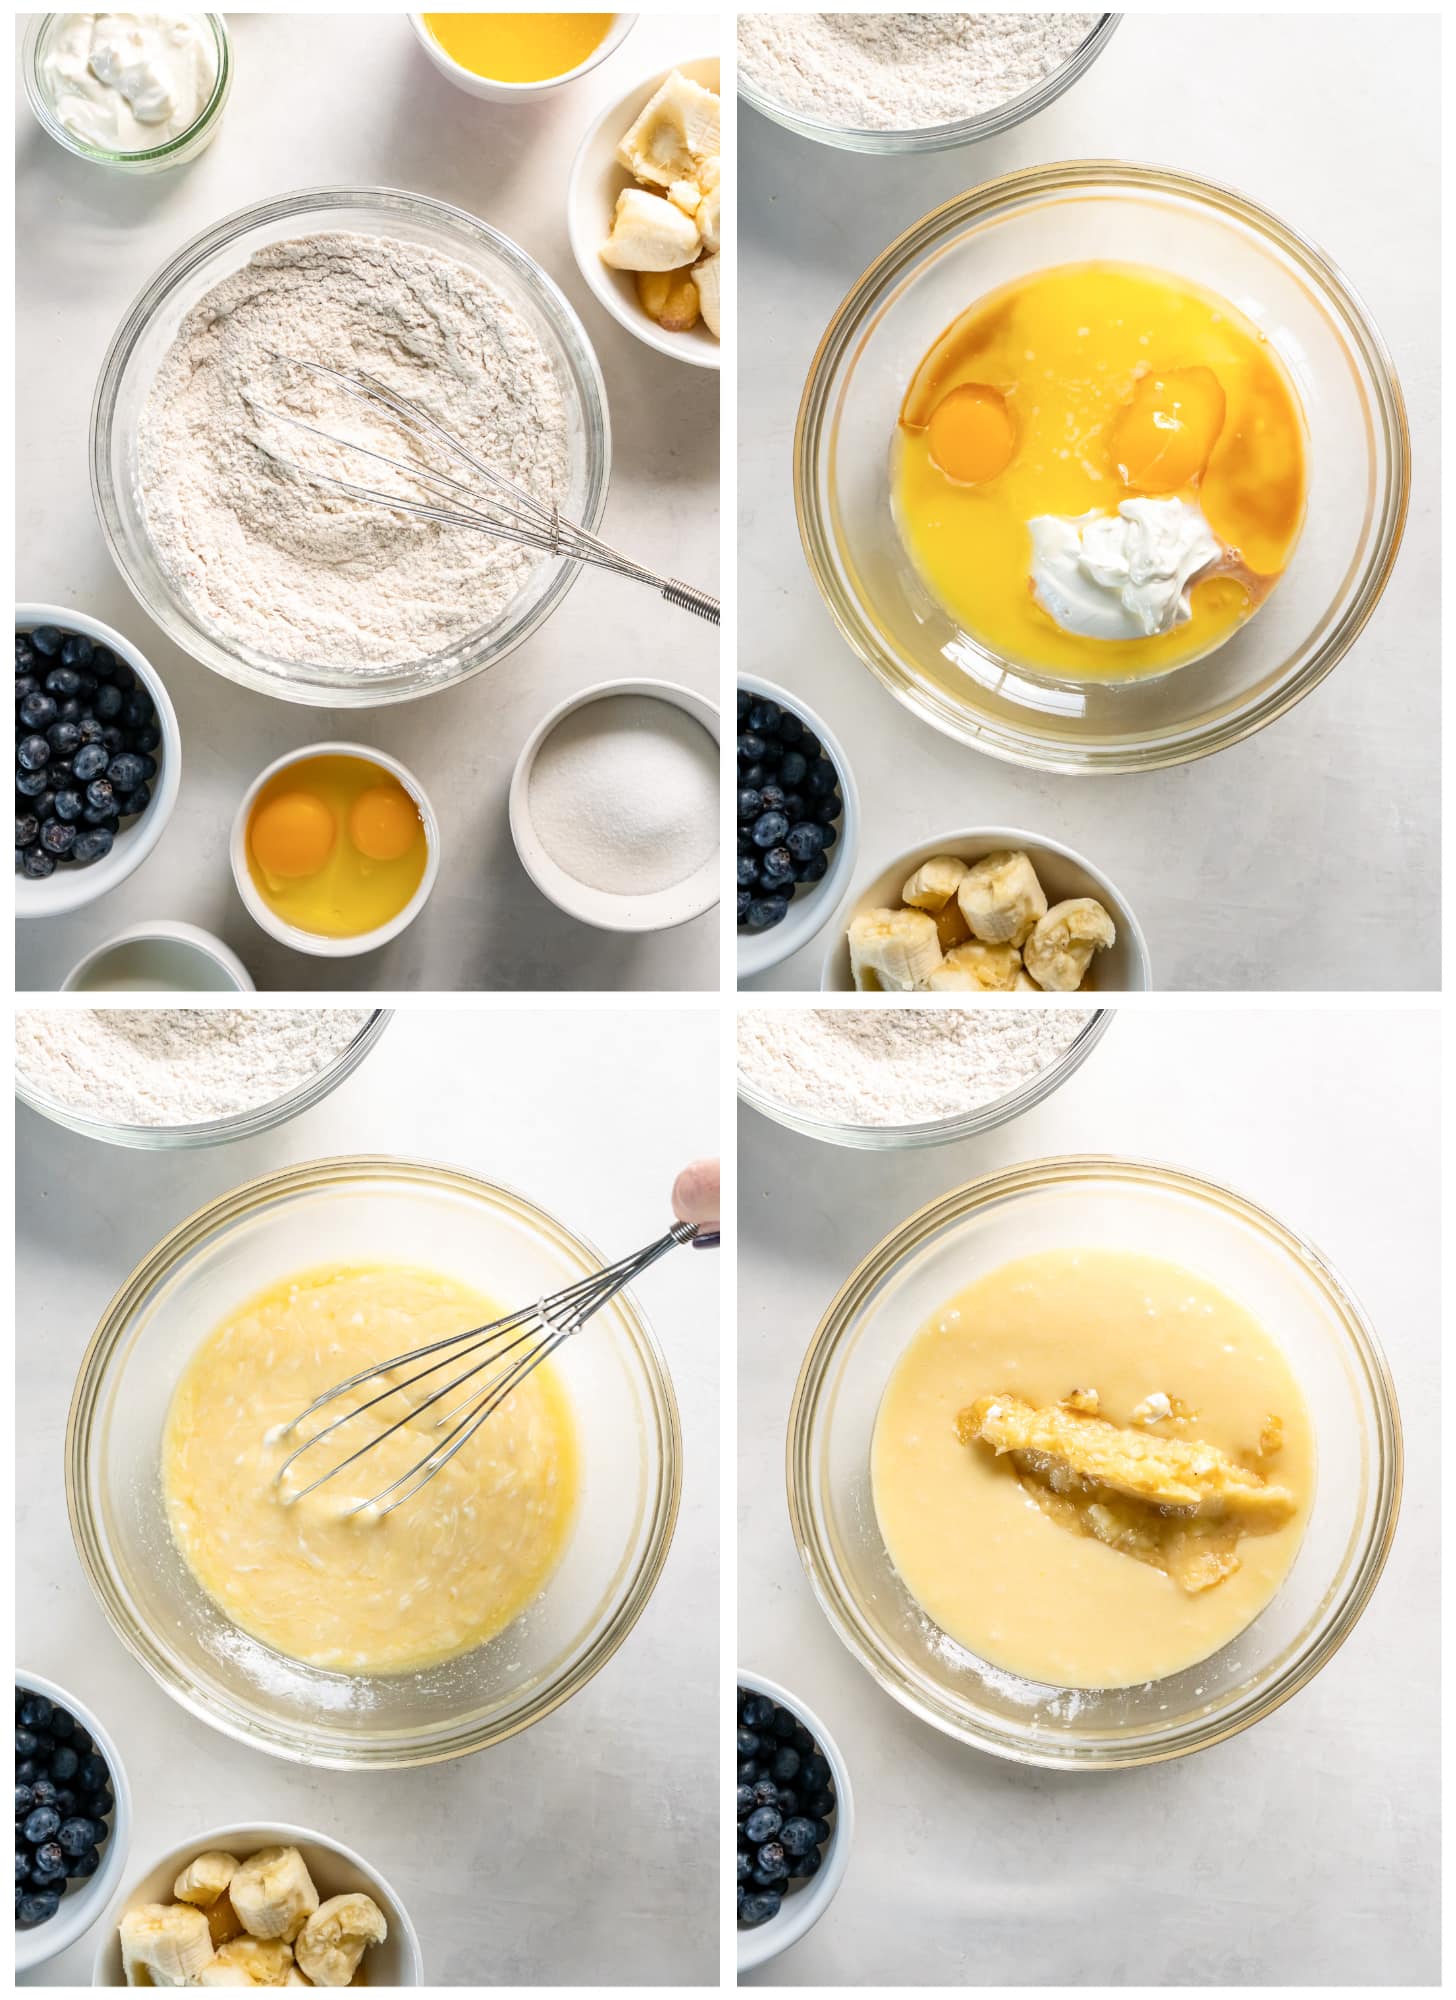 photo collage demonstrating how to make blueberry banana muffins in a mixing bowl